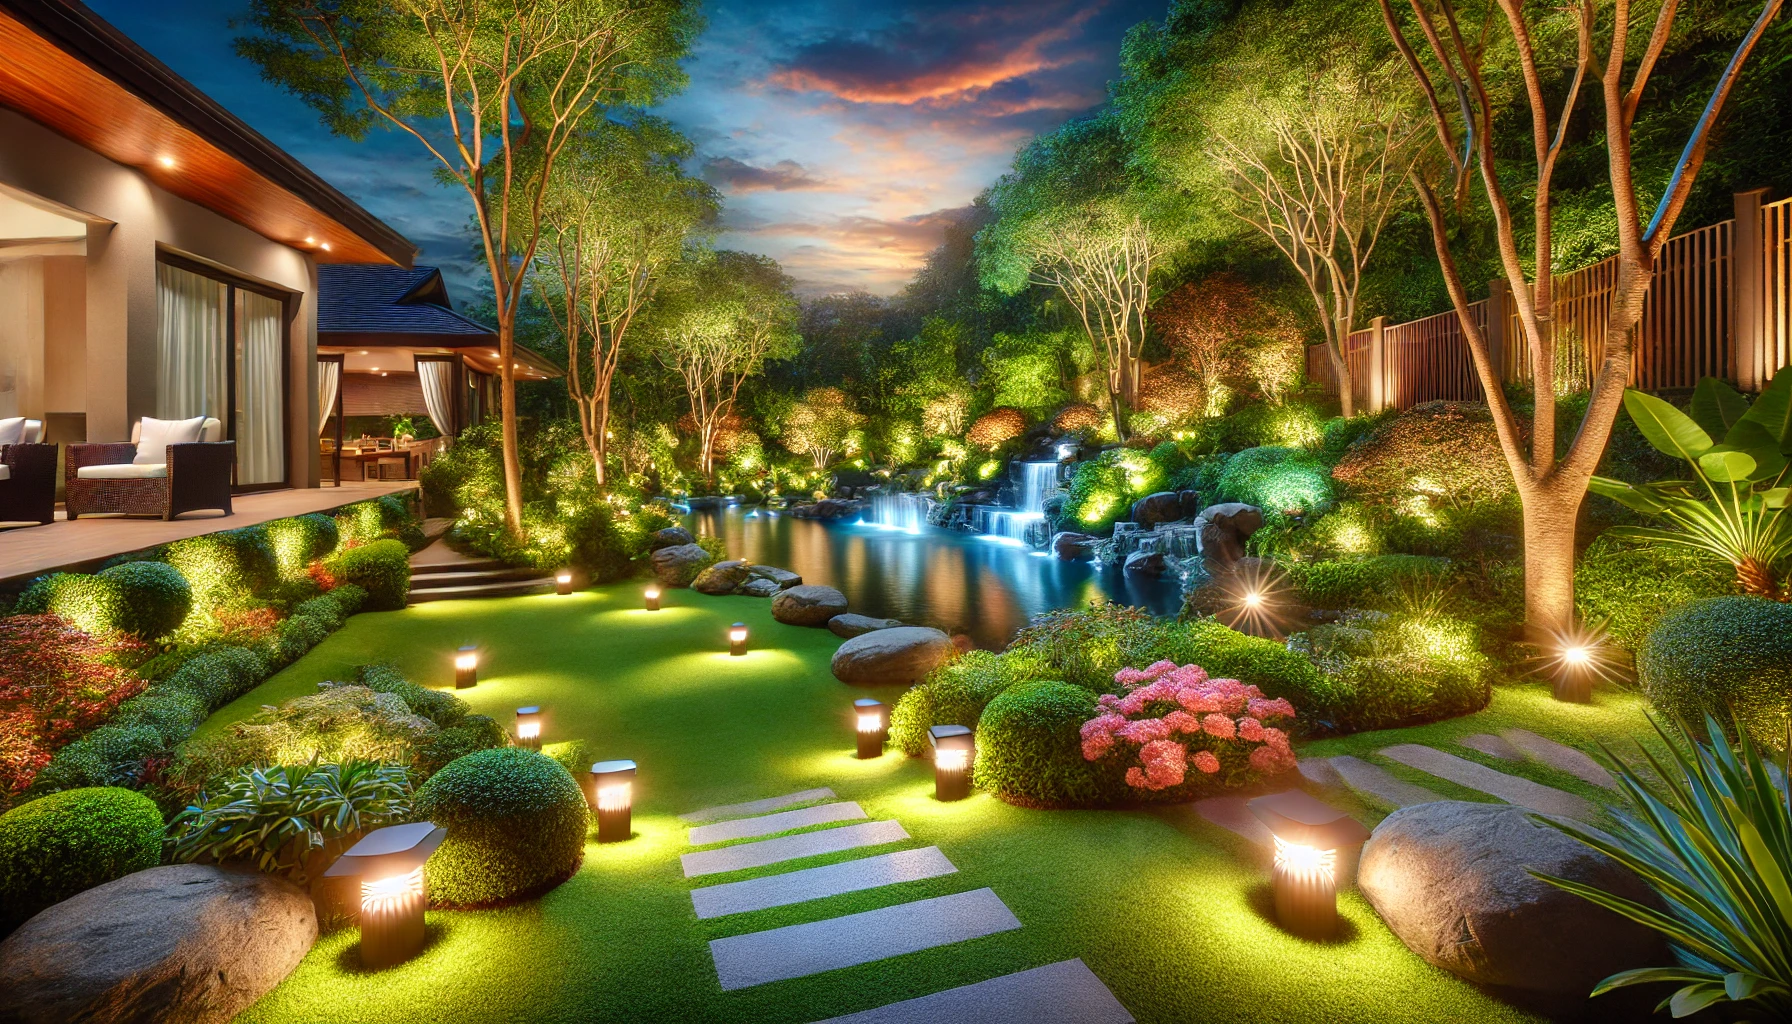 d lighting solutions that highlight specific landscape features such as garden pathways, architectural.jpg